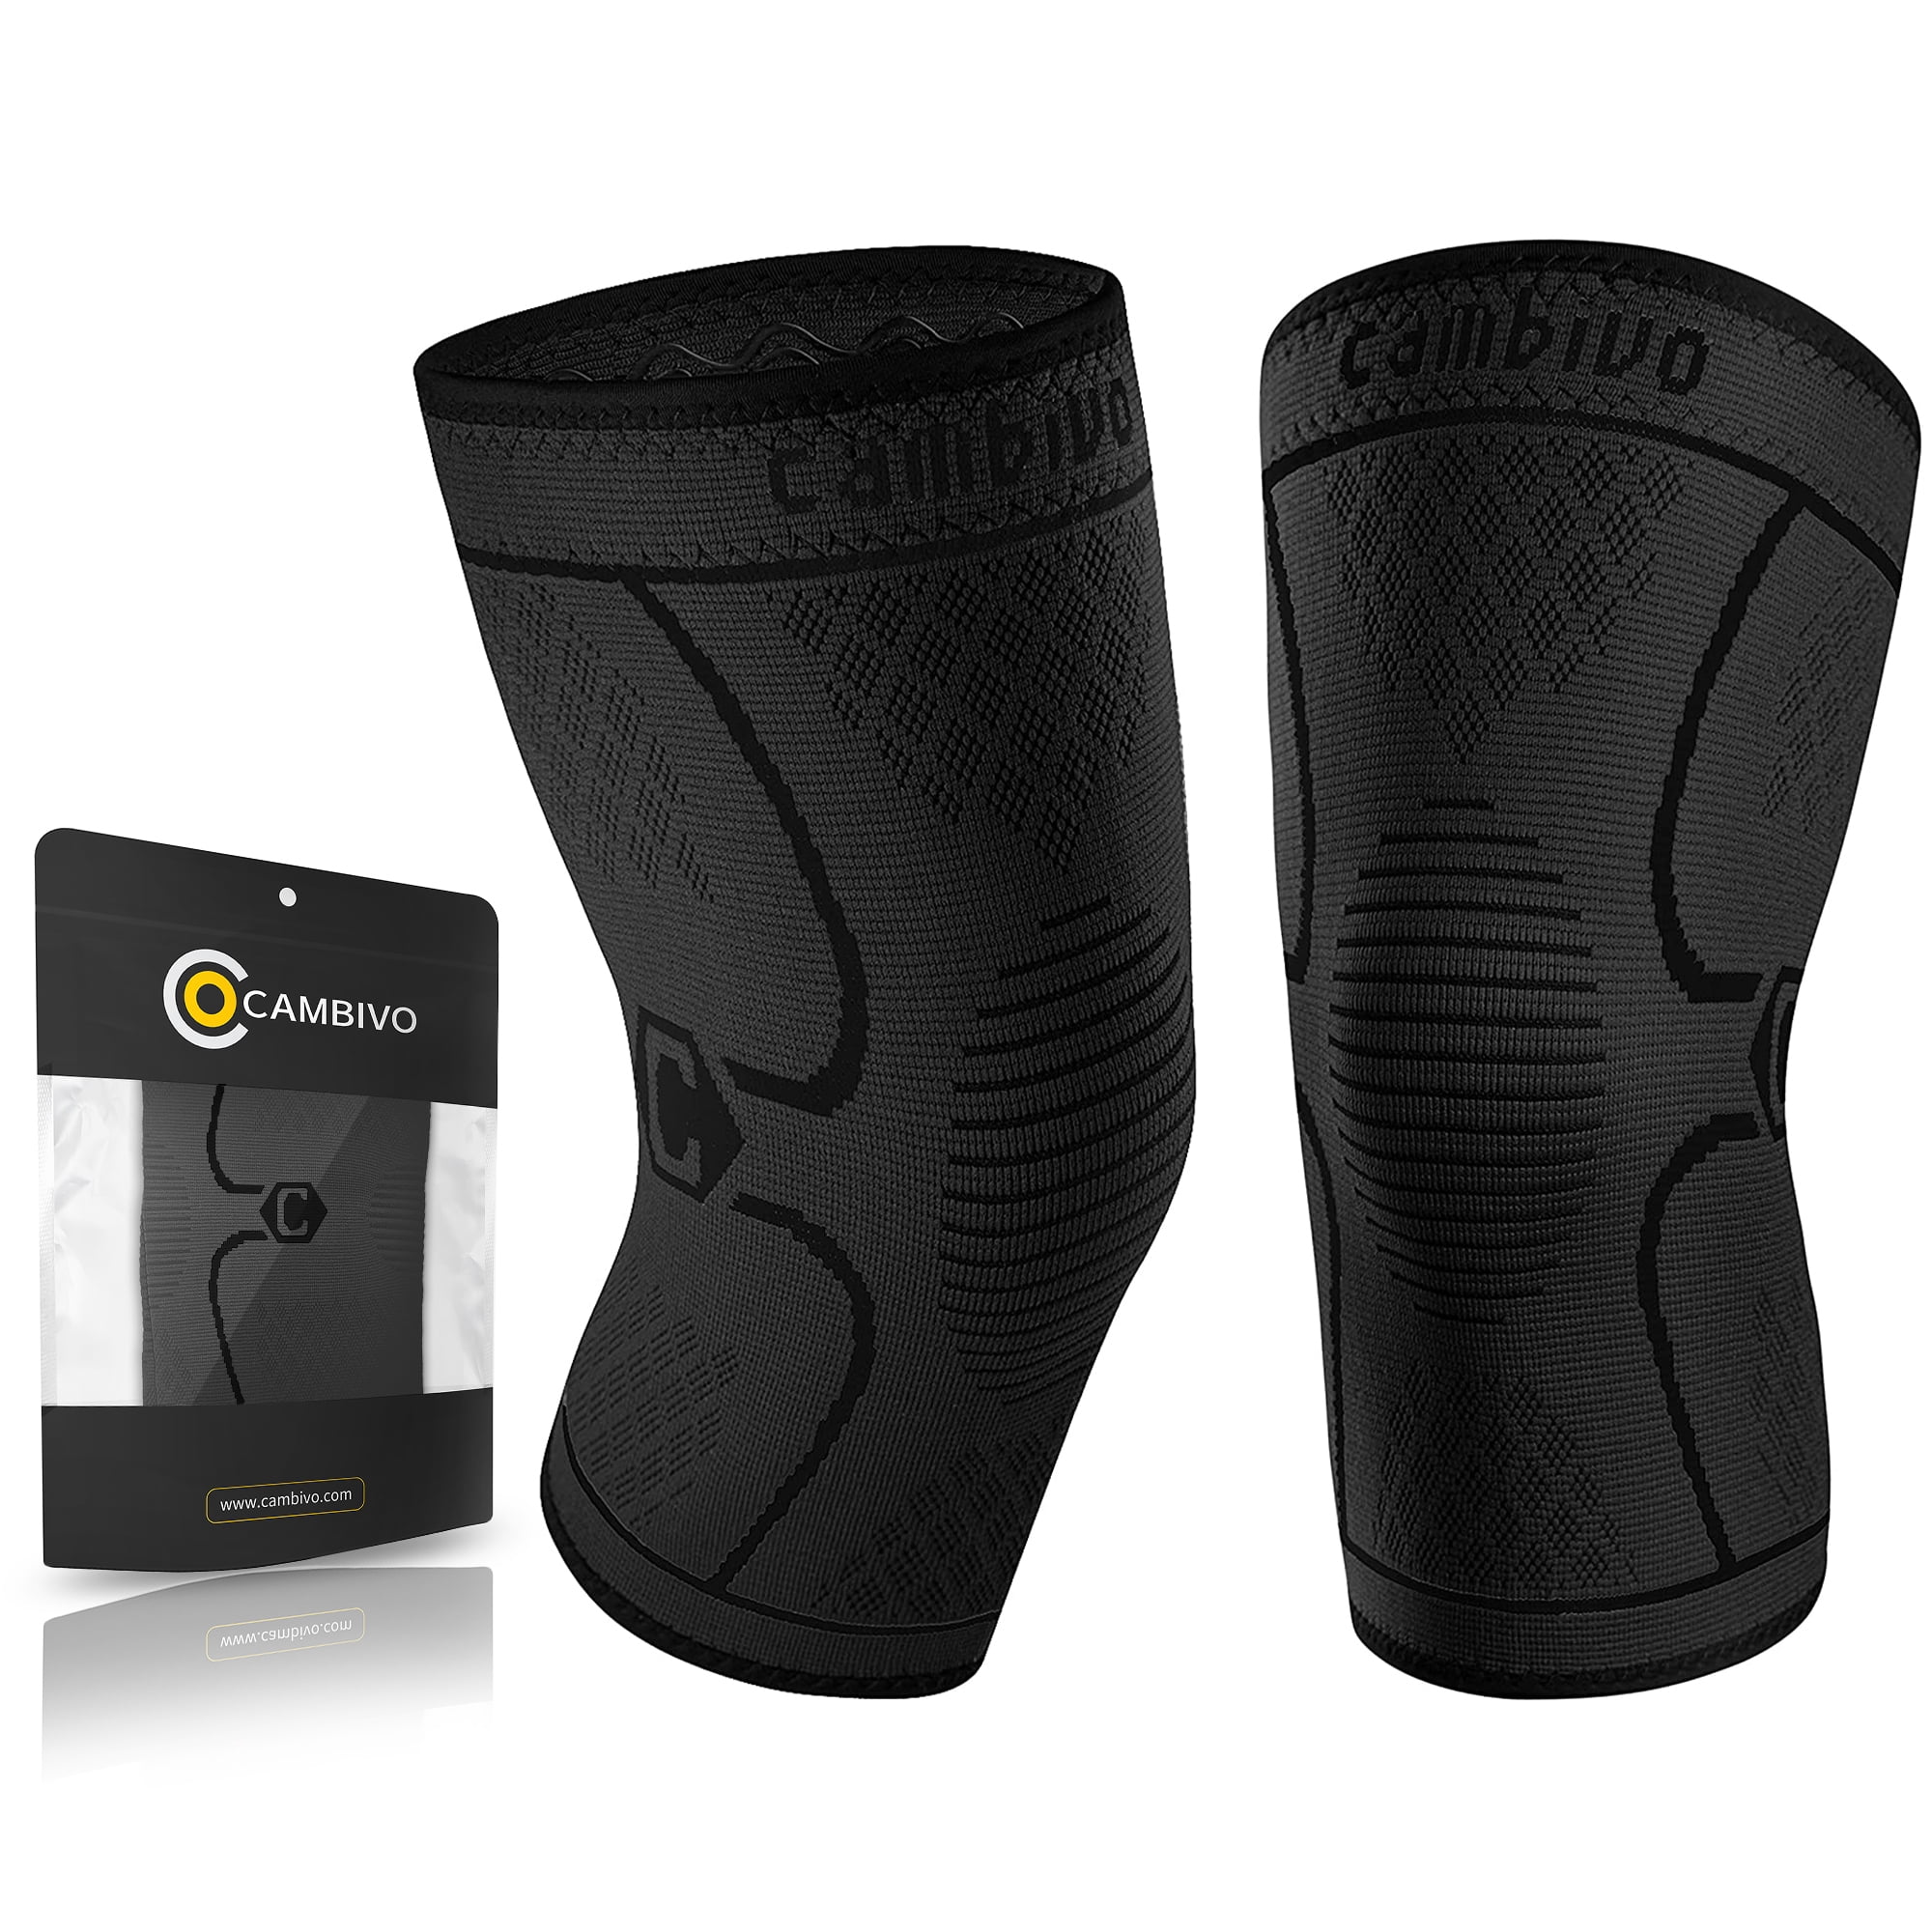 Relieving Joint Discomfort and Muscle Fatigue ACL Arthritis CAMBIVO 2 x Knee Support Brace for Men & Women Sports Meniscus Tear Compression Sleeves for Running